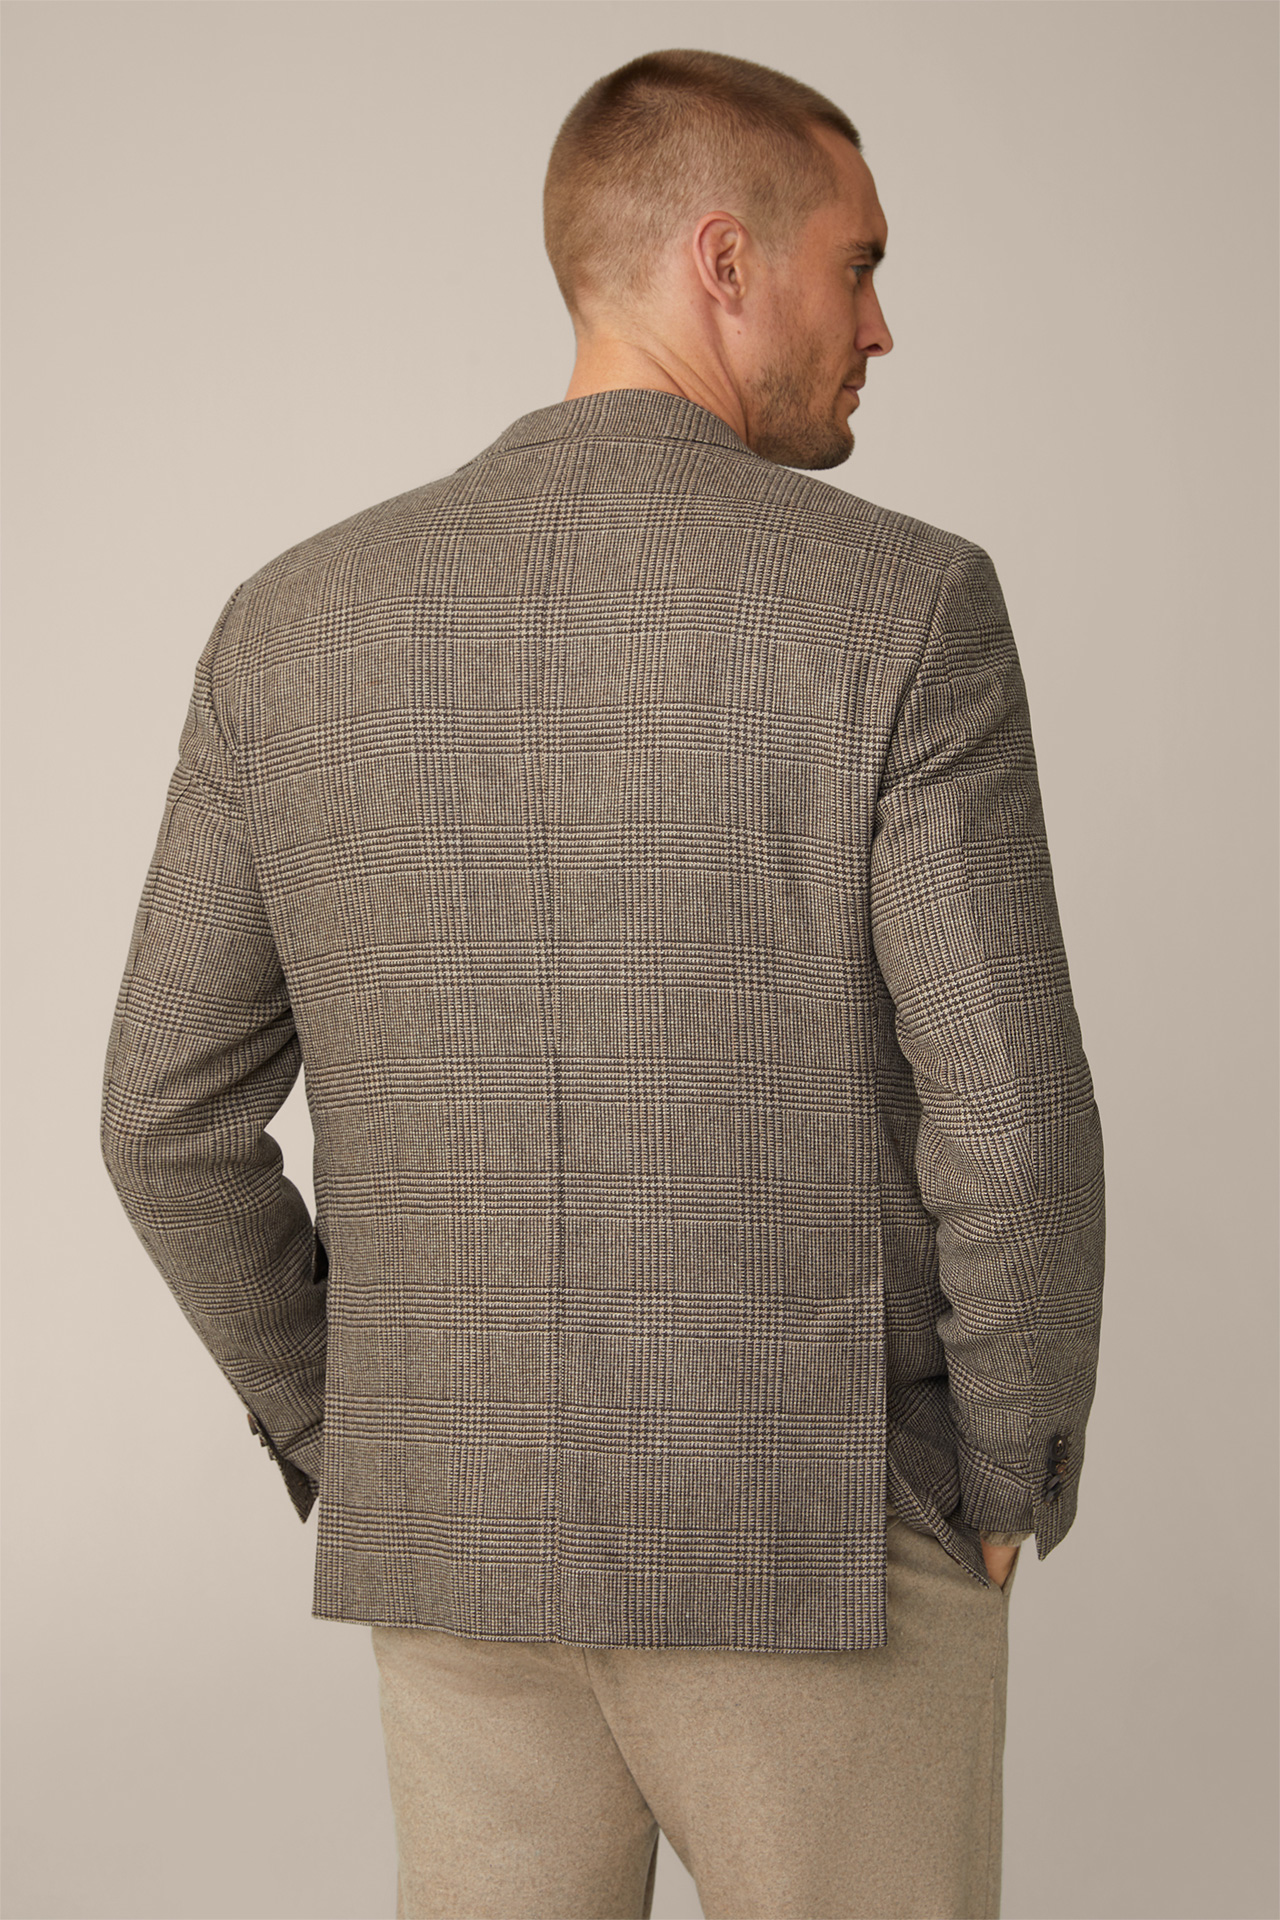 Sono Wool Blend Jacket with Cashmere in a Brown Pattern